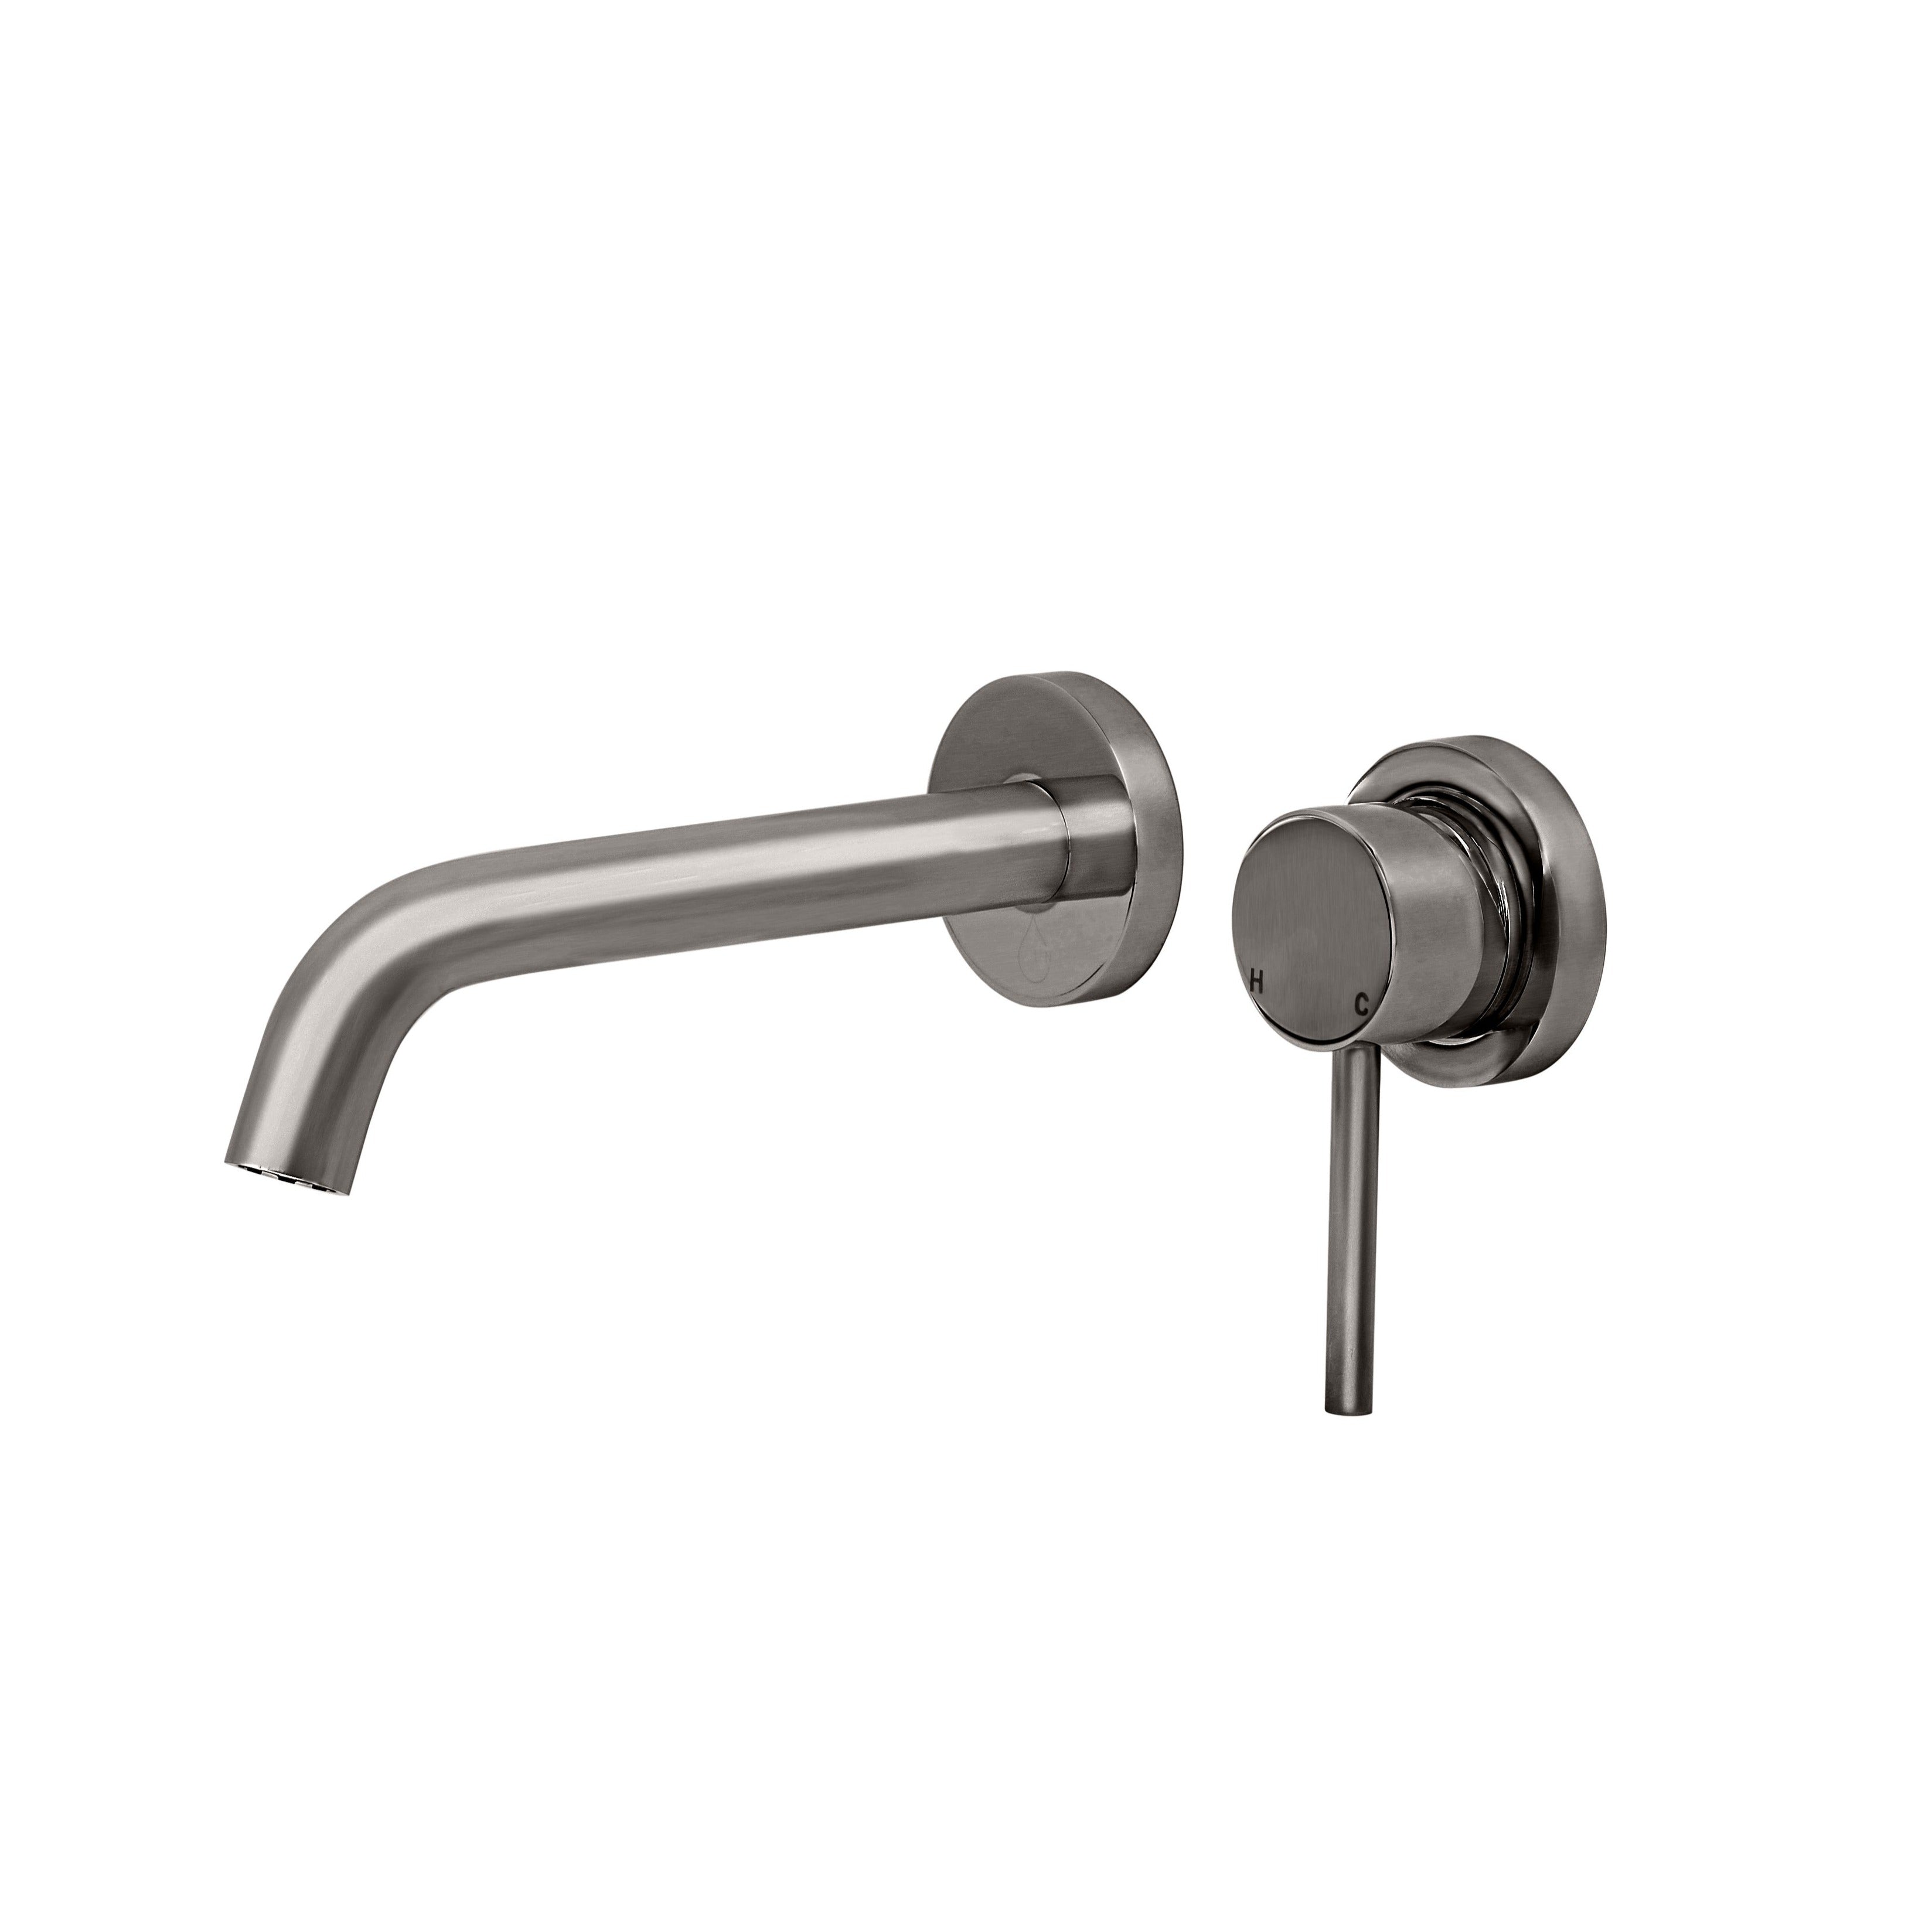 Bondi Pin Lever Wall Mixer Set with Curved Spout in Brushed Gunmetal